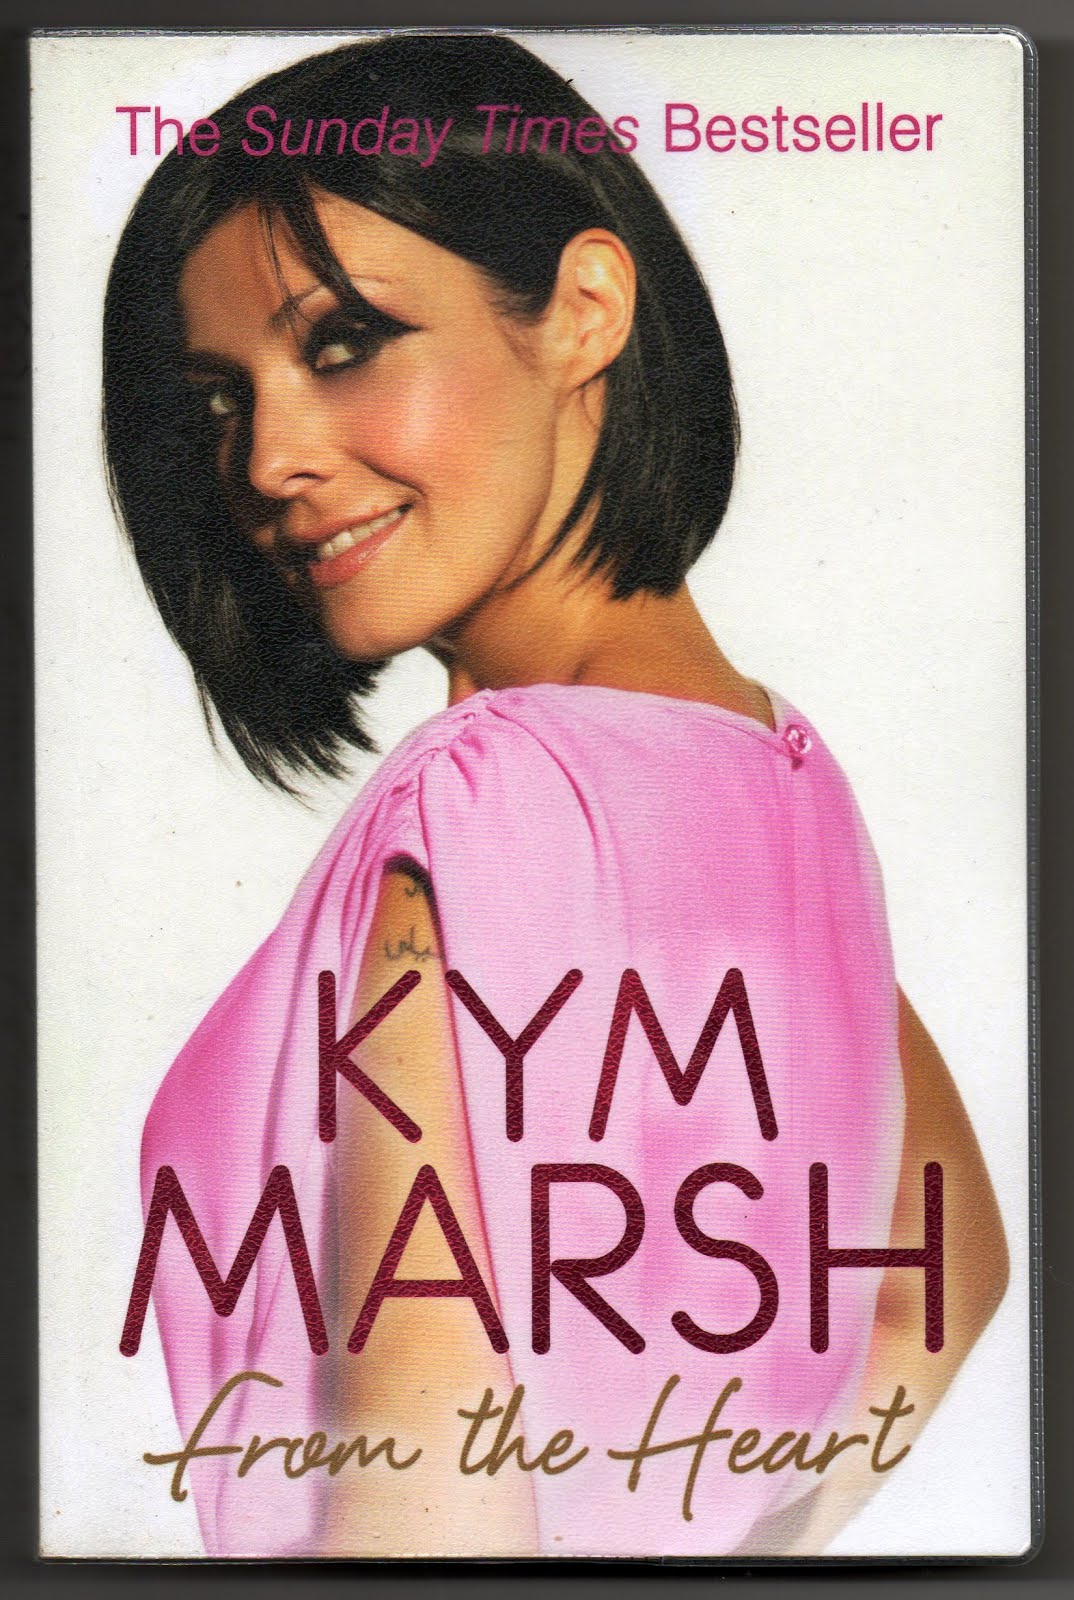 Life After Money From the Heart by Kym Marsh. Book review